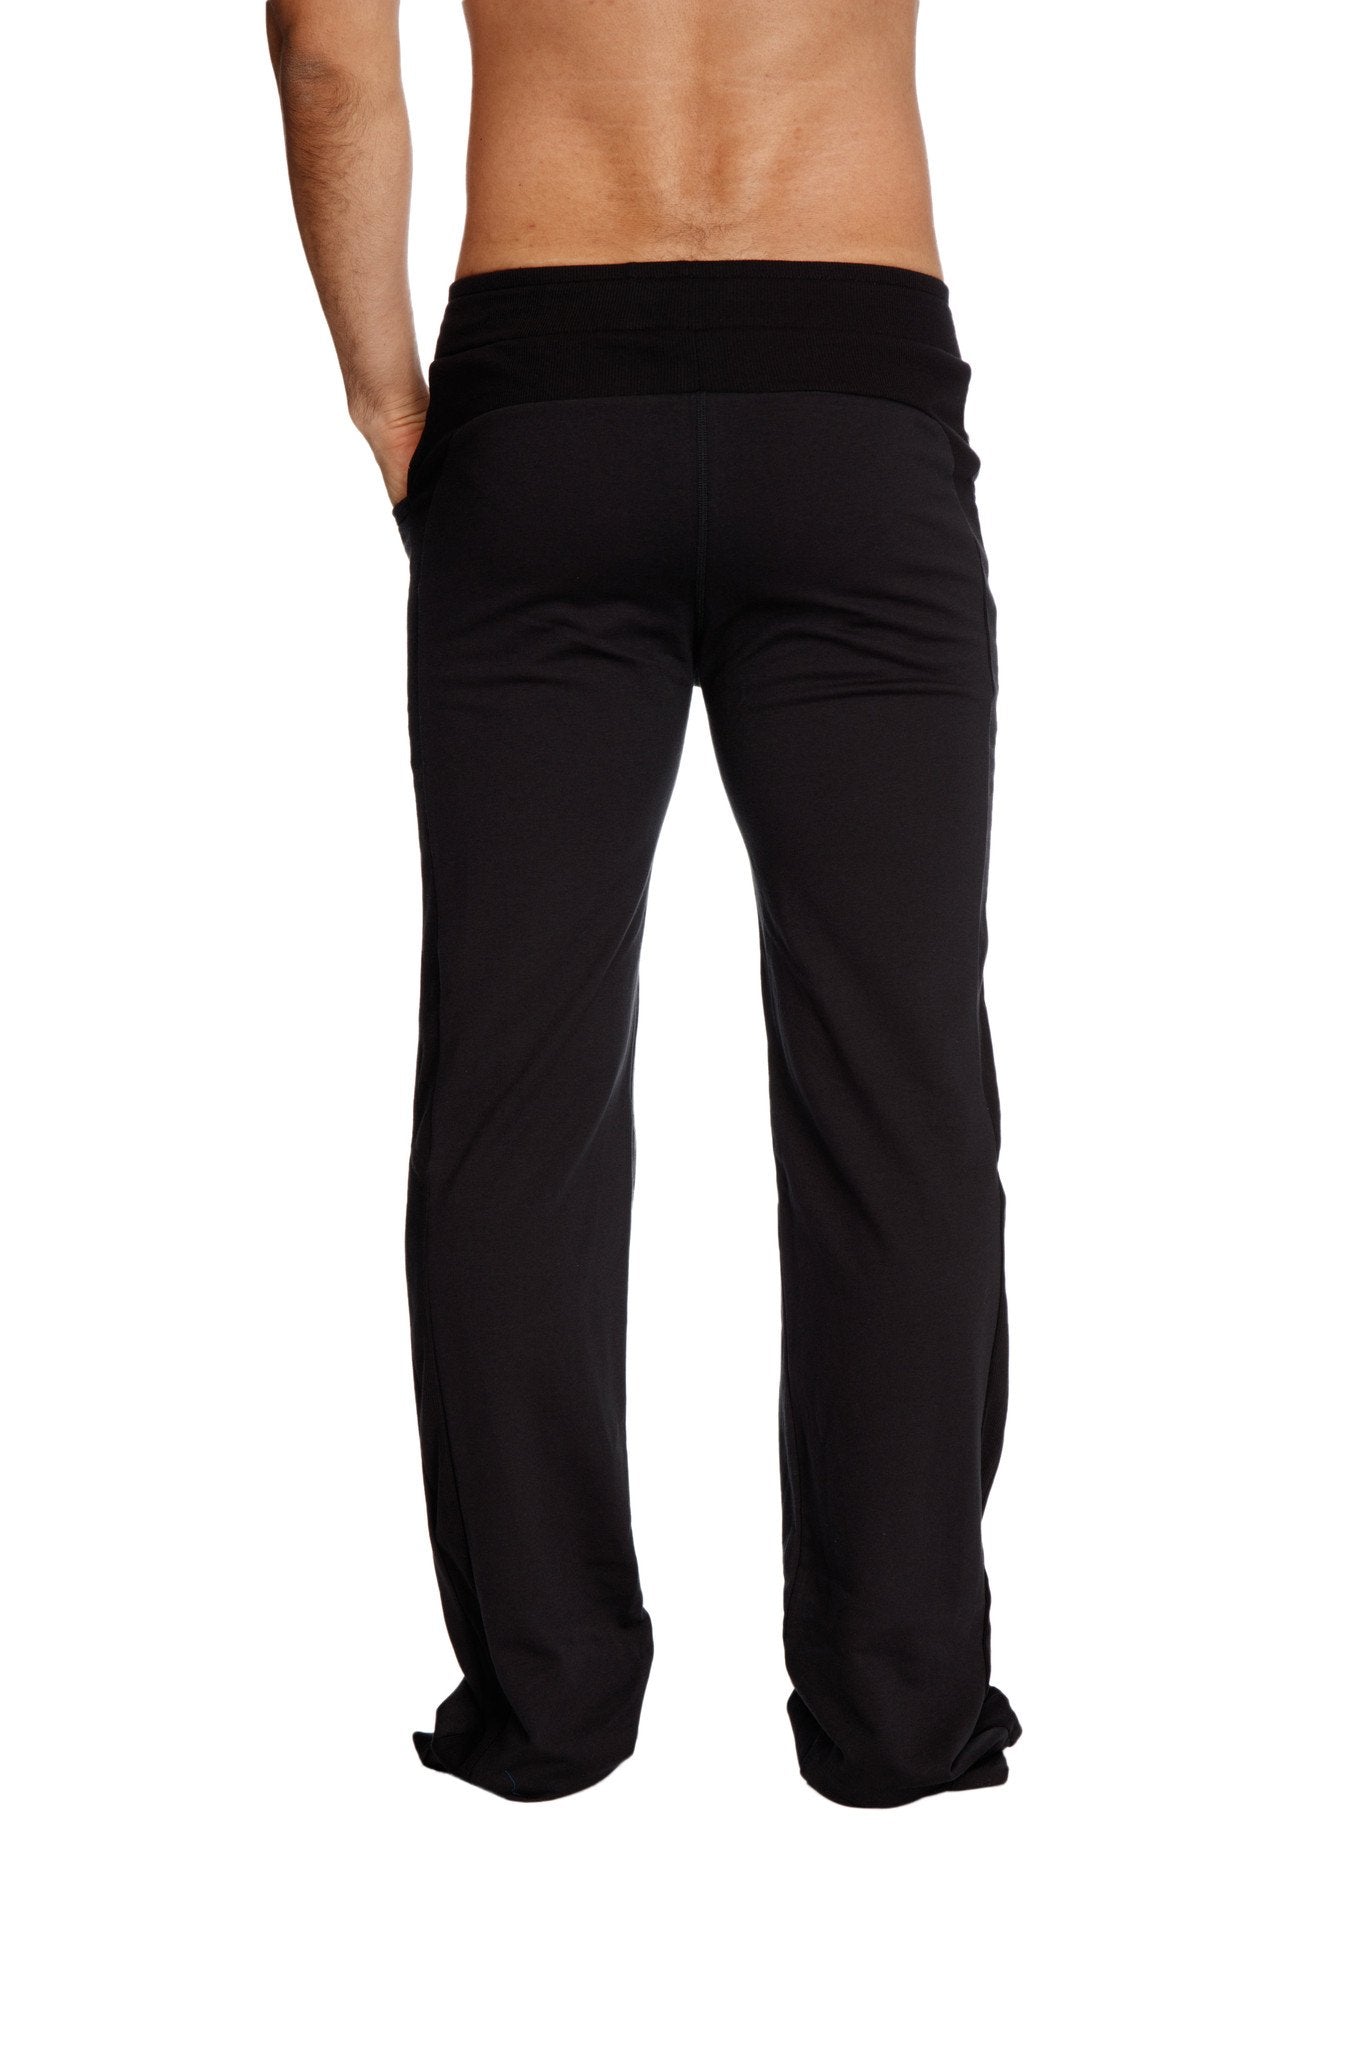 Eco-Track & Yoga Sweat Pant (Solid Black) by 4-rth